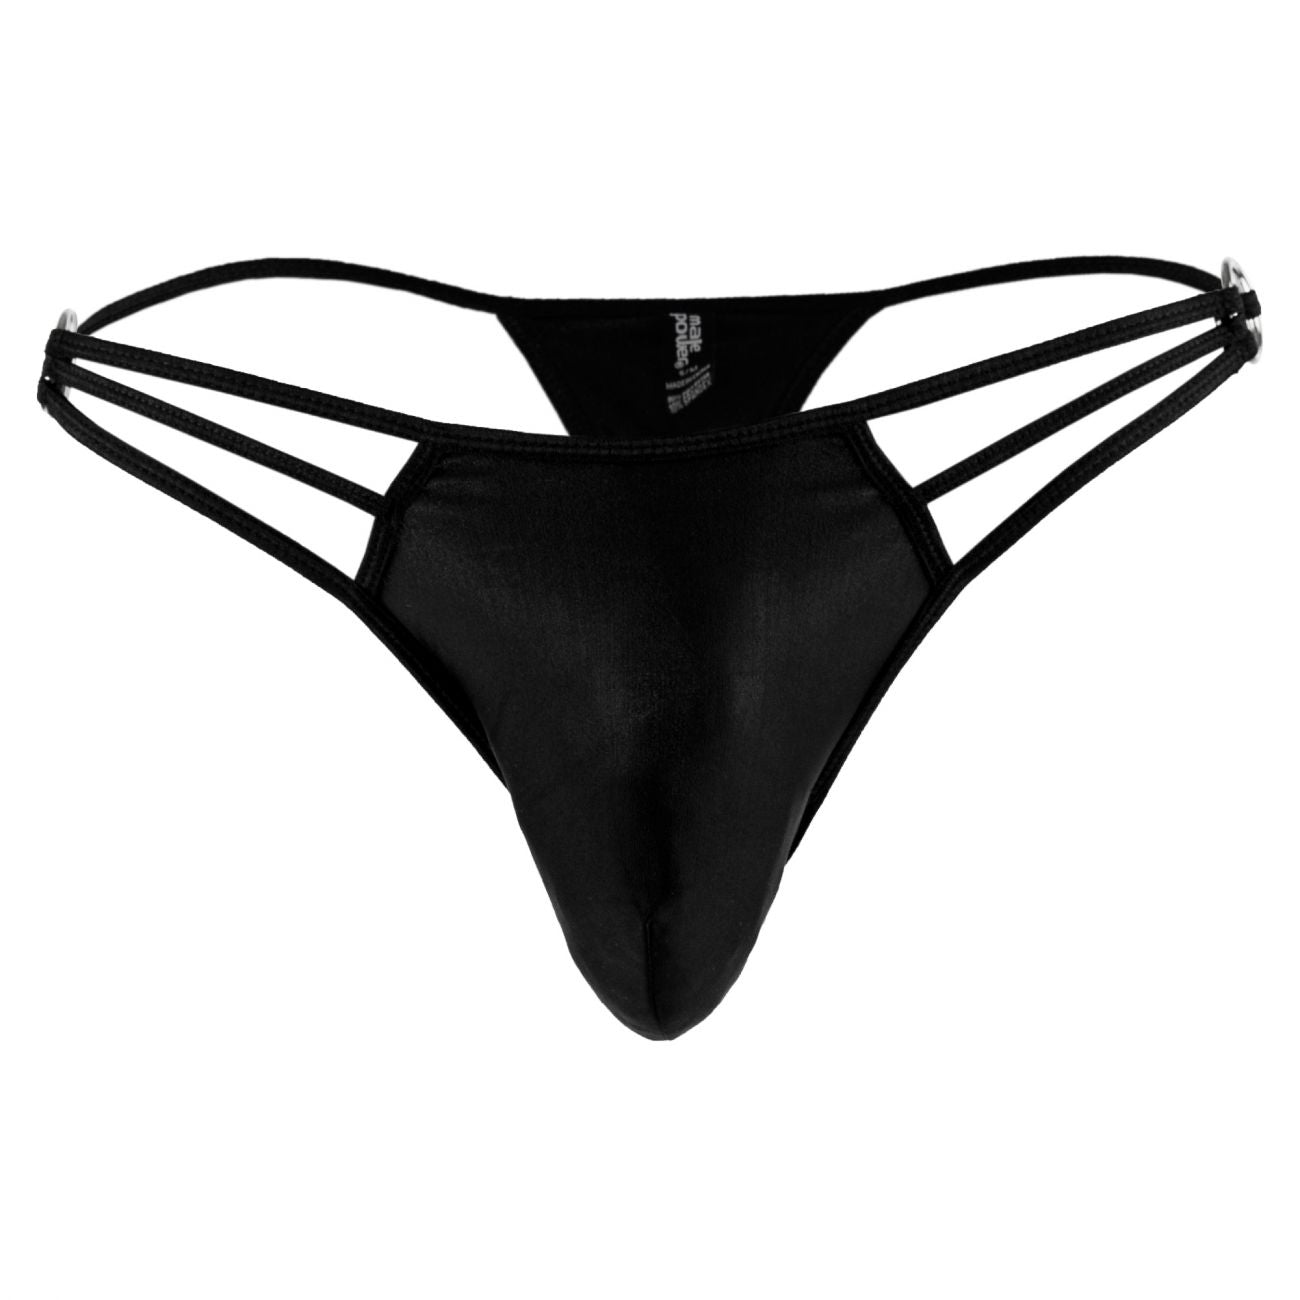 Male Power PAK828 G-Thong with Straps and Rings